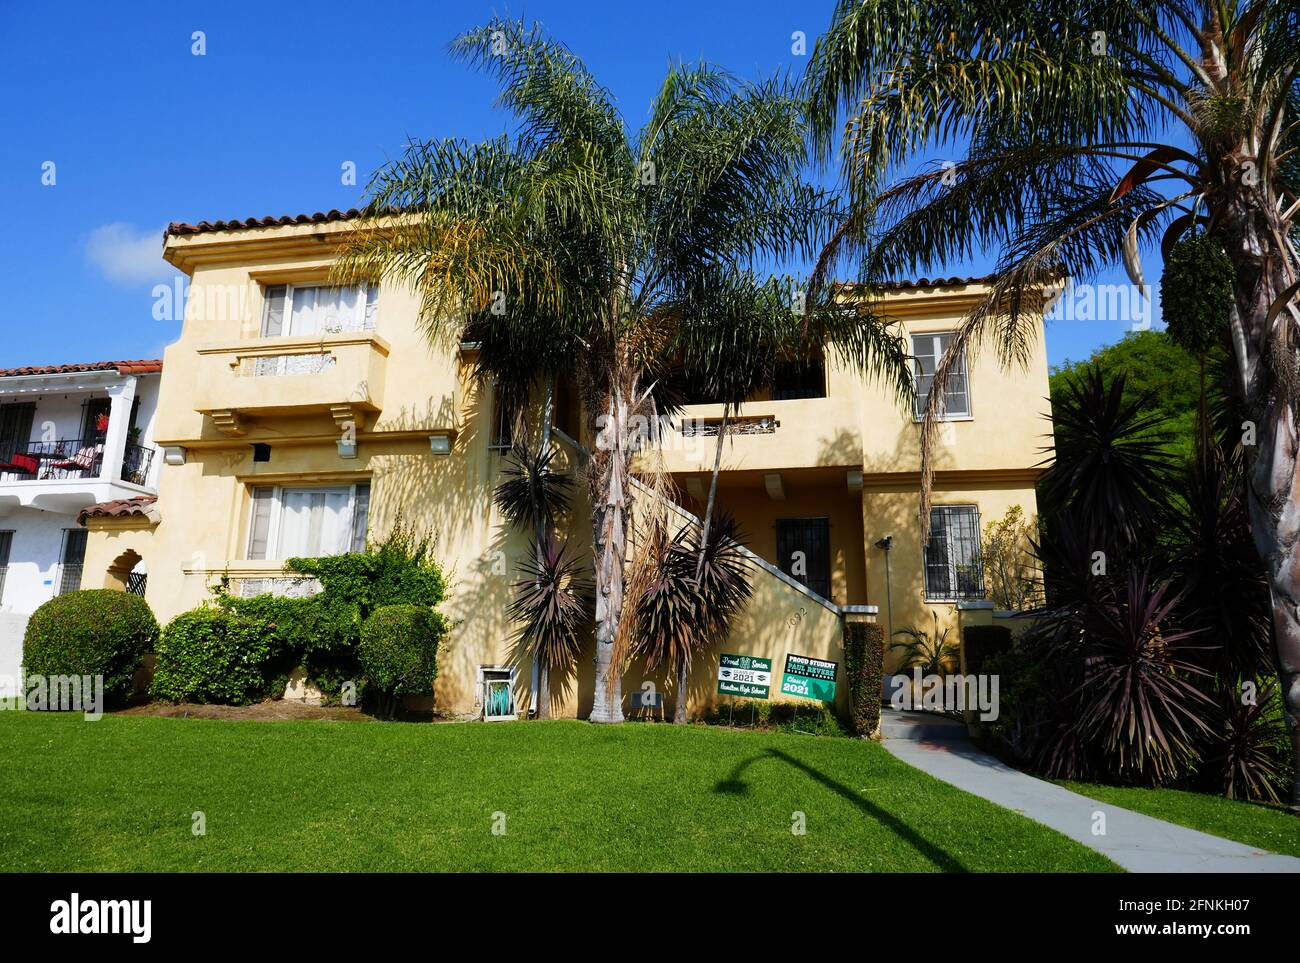 Los Angeles, California, USA 17th May 2021 A general view of atmosphere of actor Brad Renfro's Final Home/apartment and death location where he died at 1092 South Ogden Drive in Los Angeles, California, USA. Photo by Barry King/Alamy Stock Photo Stock Photo